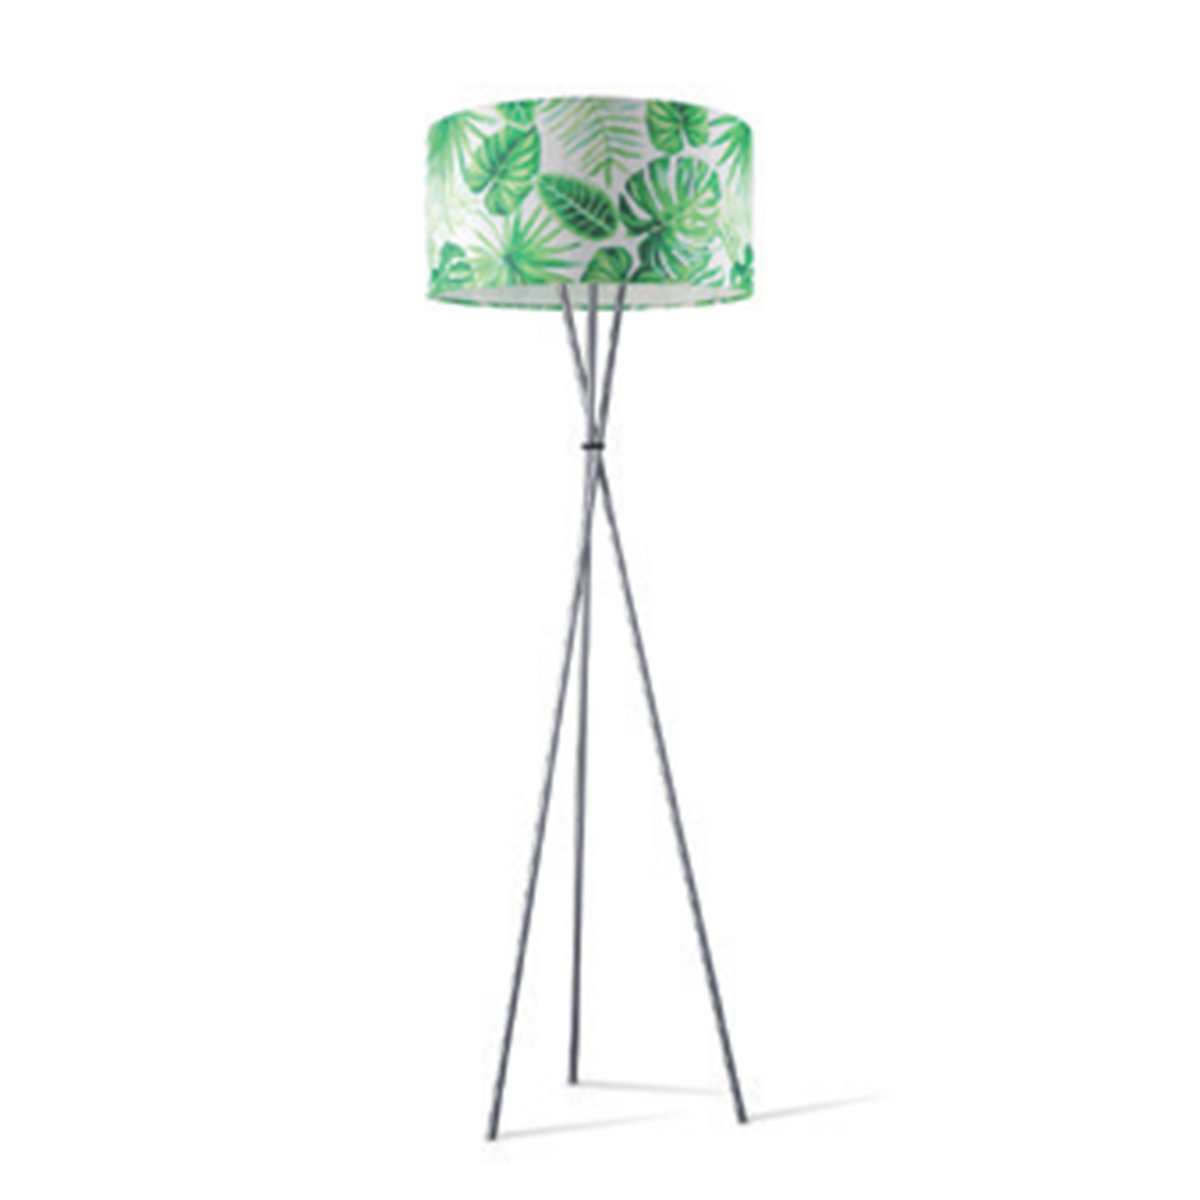 Tangla lighting - TLF7010-01A - LED floor lamp 1 Light - metal and fabric in white ground - leaf - E27